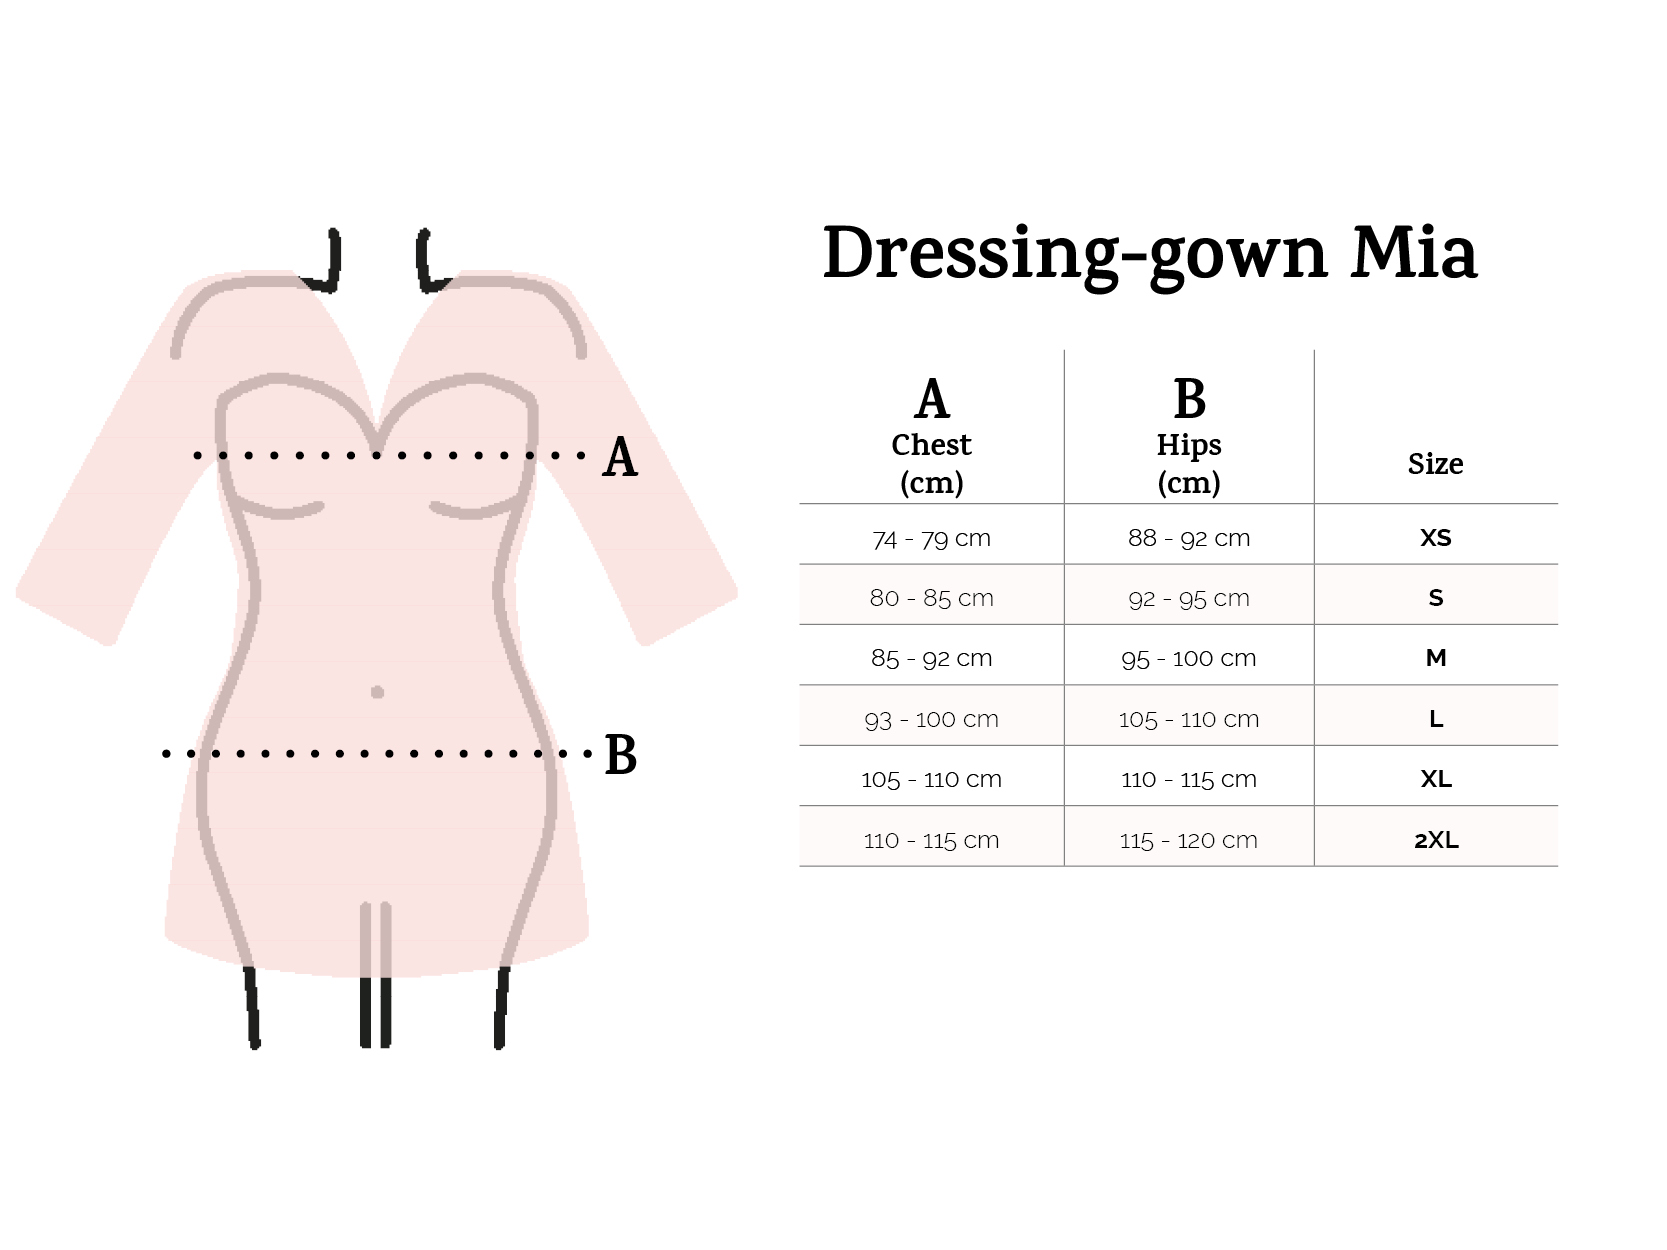 Dressing-gown Mia